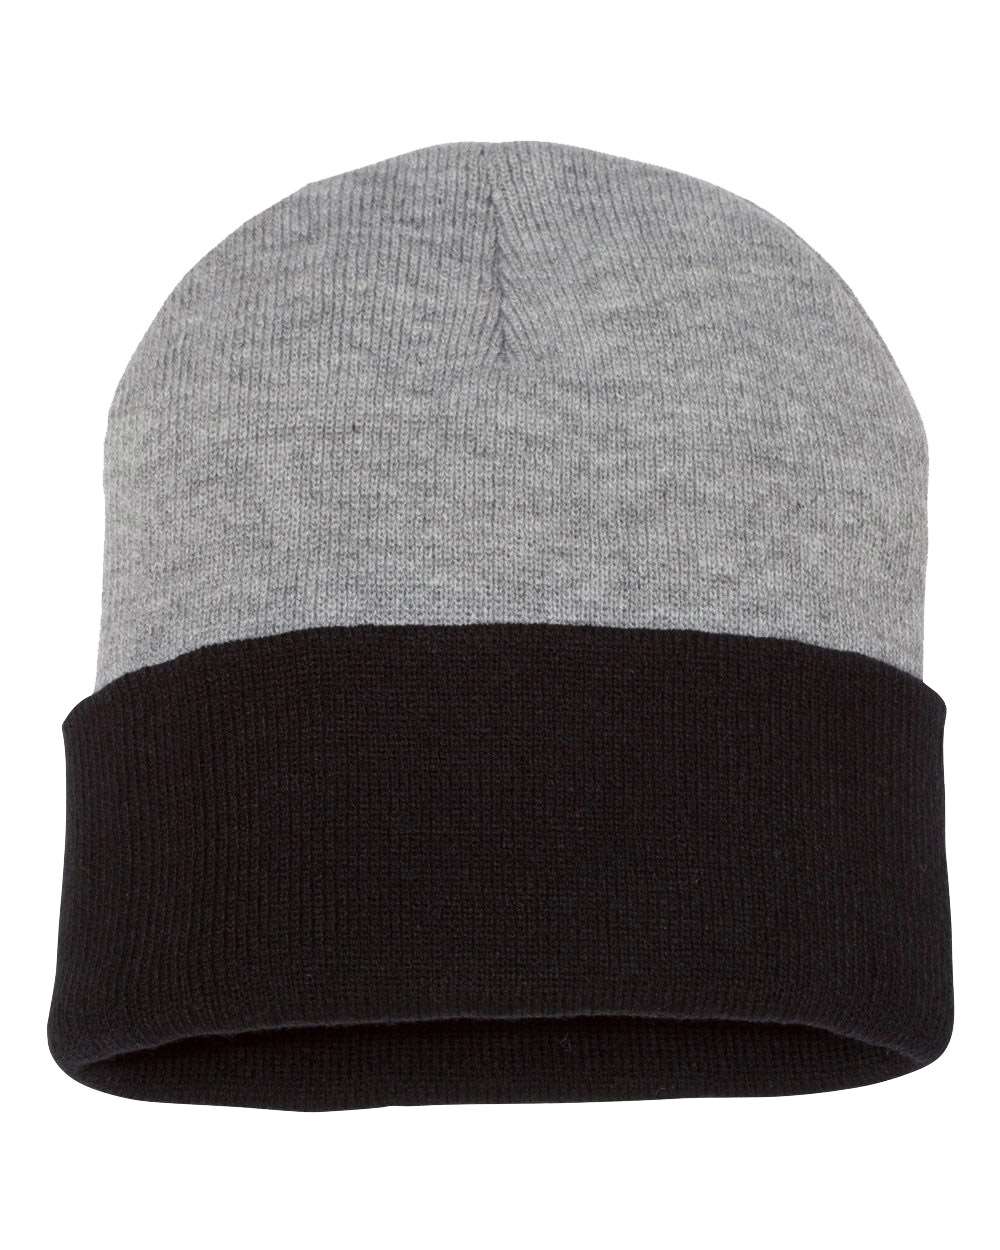 Sportsman Colorblocked 12" Cuffed Beanie SP12T #color_Heather/ Black